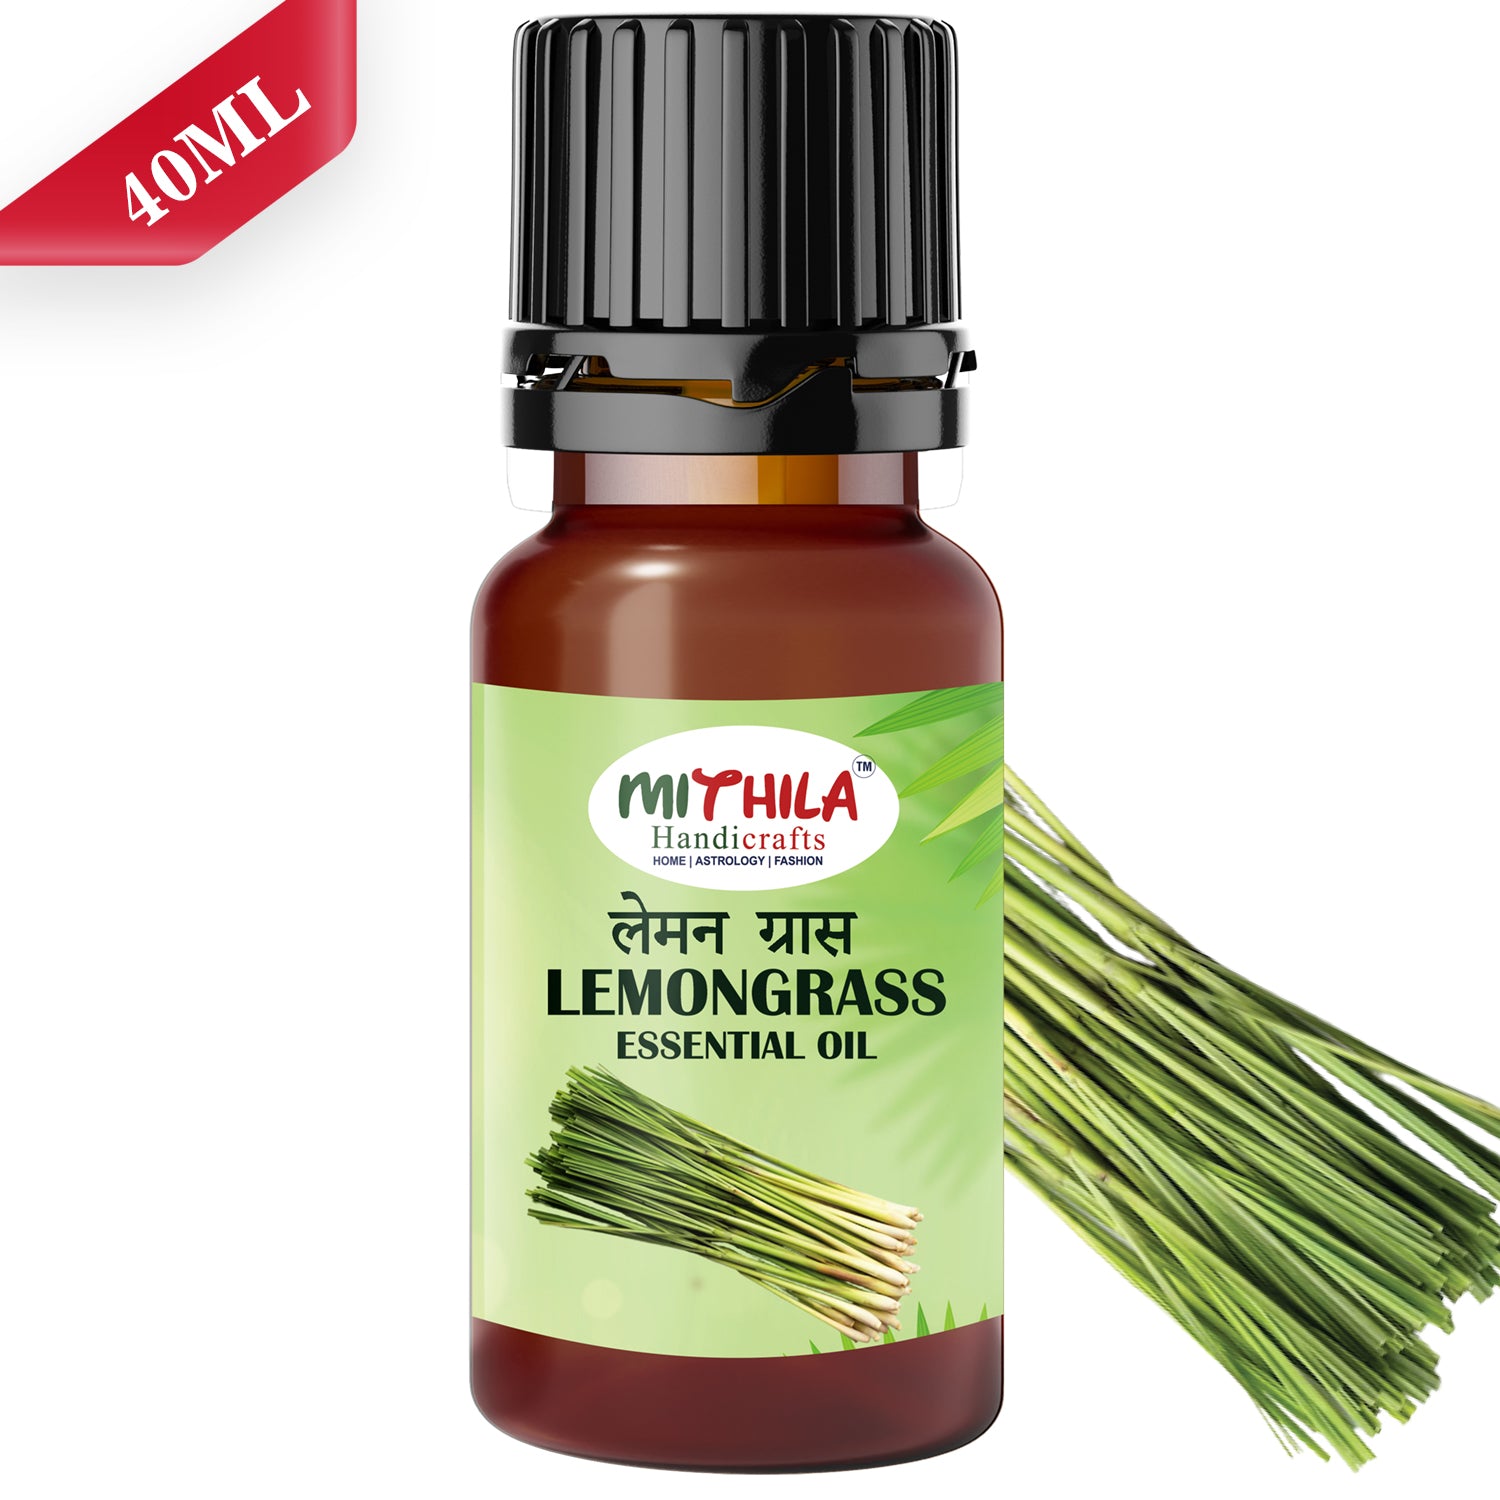 Lemongrass Essential Oil For Skin, Hair Care, Home Fragrance, Aroma Therapy 40ml